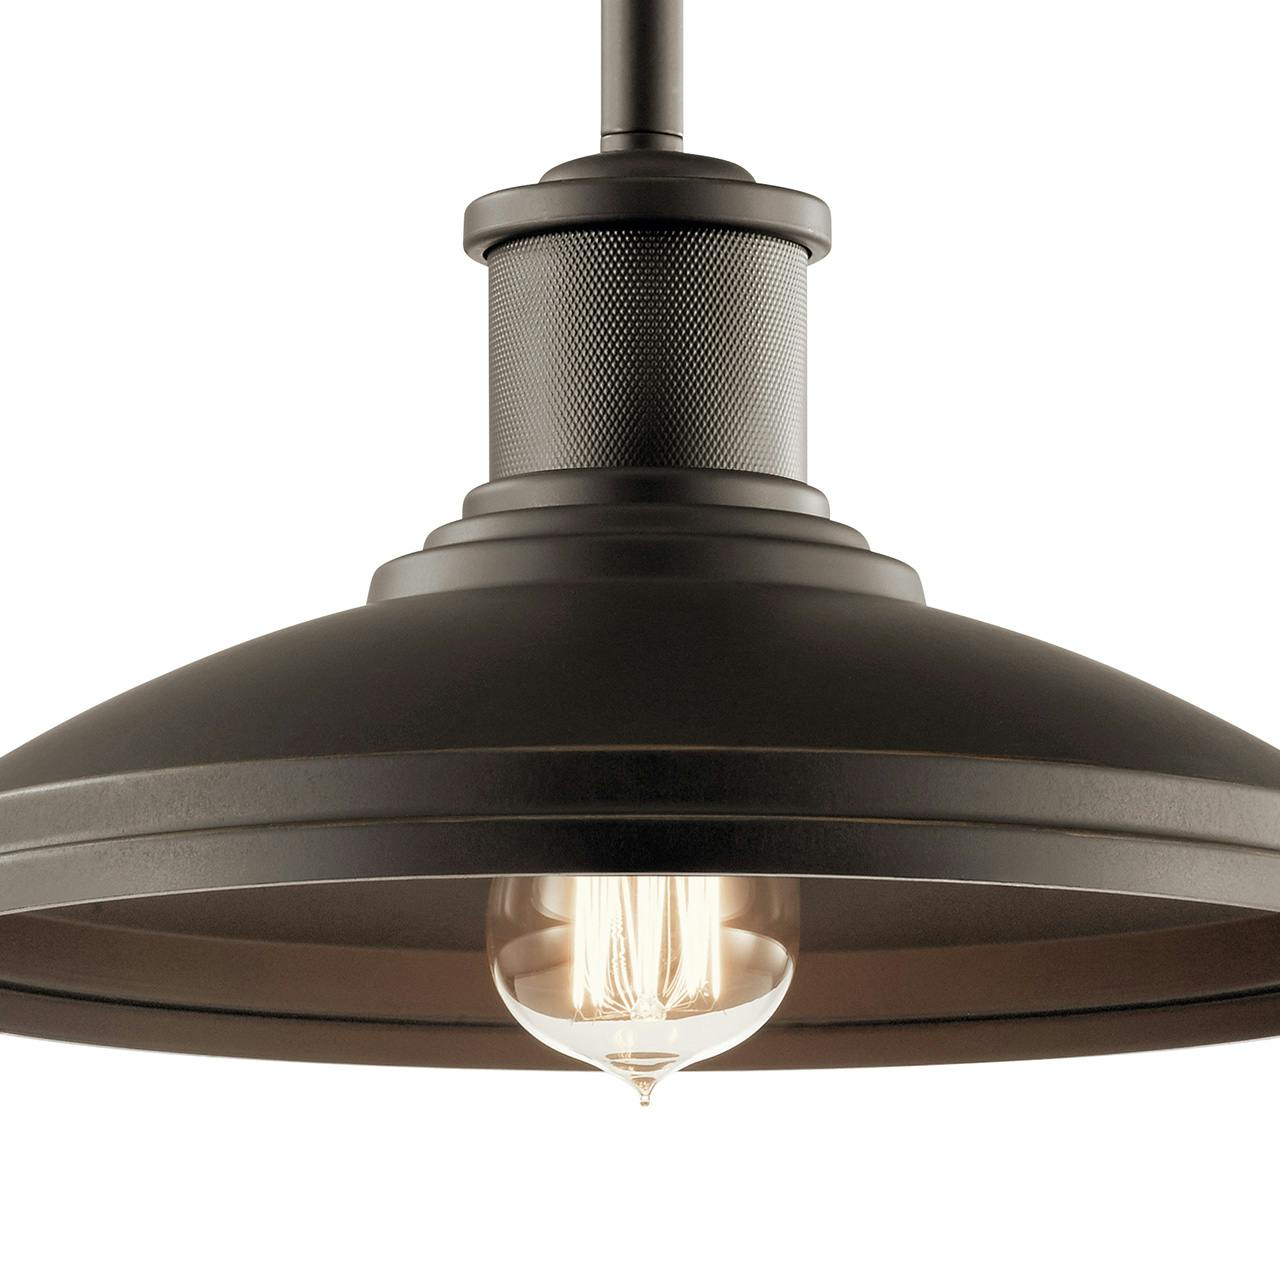 Close up view of the Allenbury™ 1 Light Pendant Olde Bronze on a white background